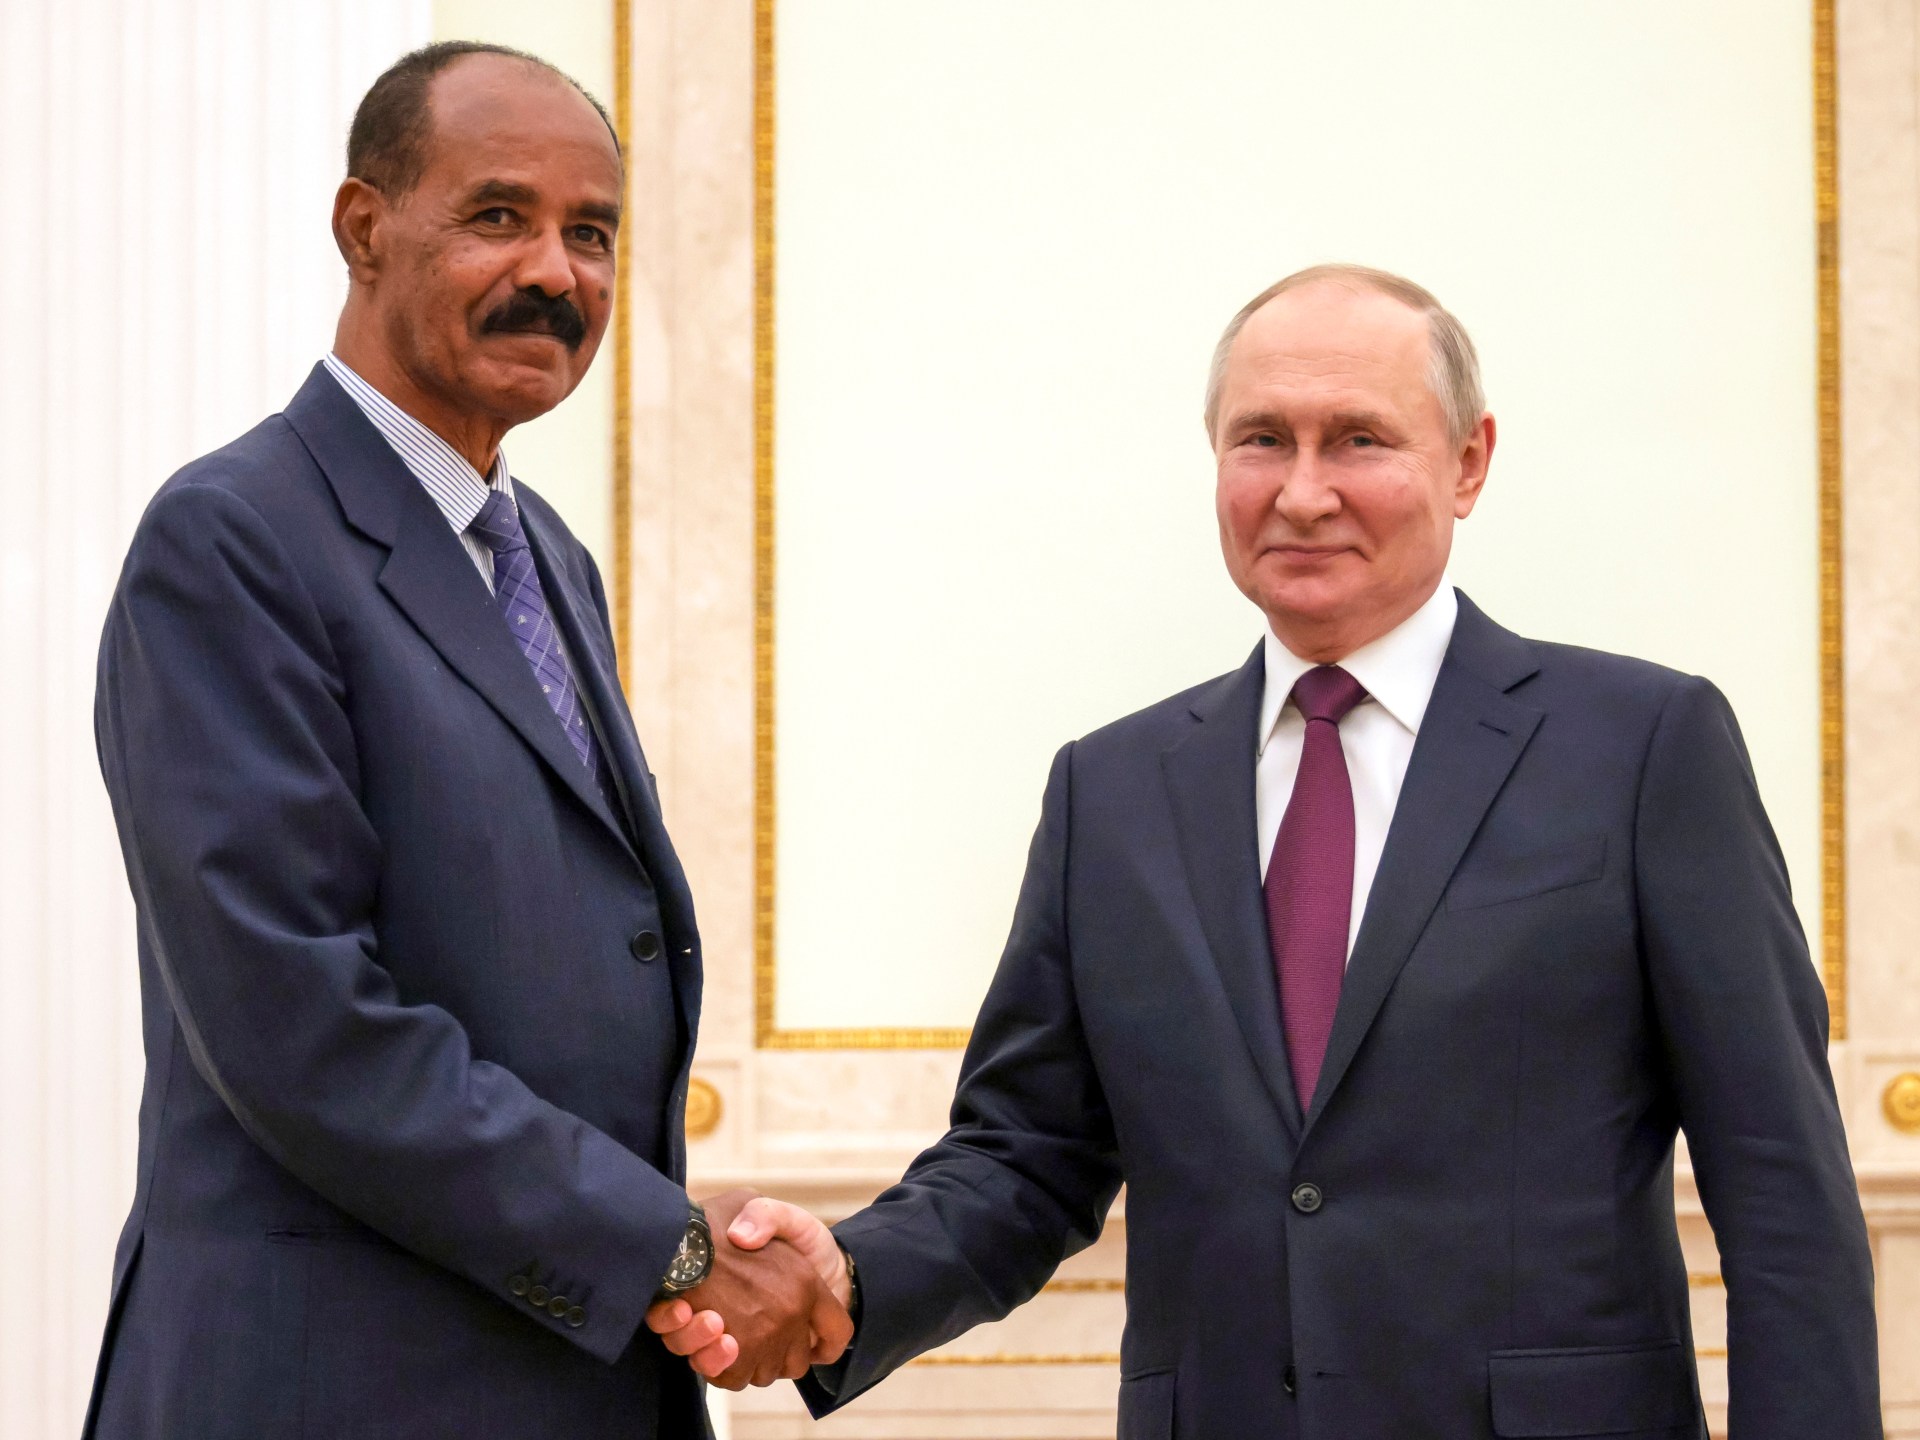 eritrea-rejoins-east-africa-bloc-after-exit-16-years-ago